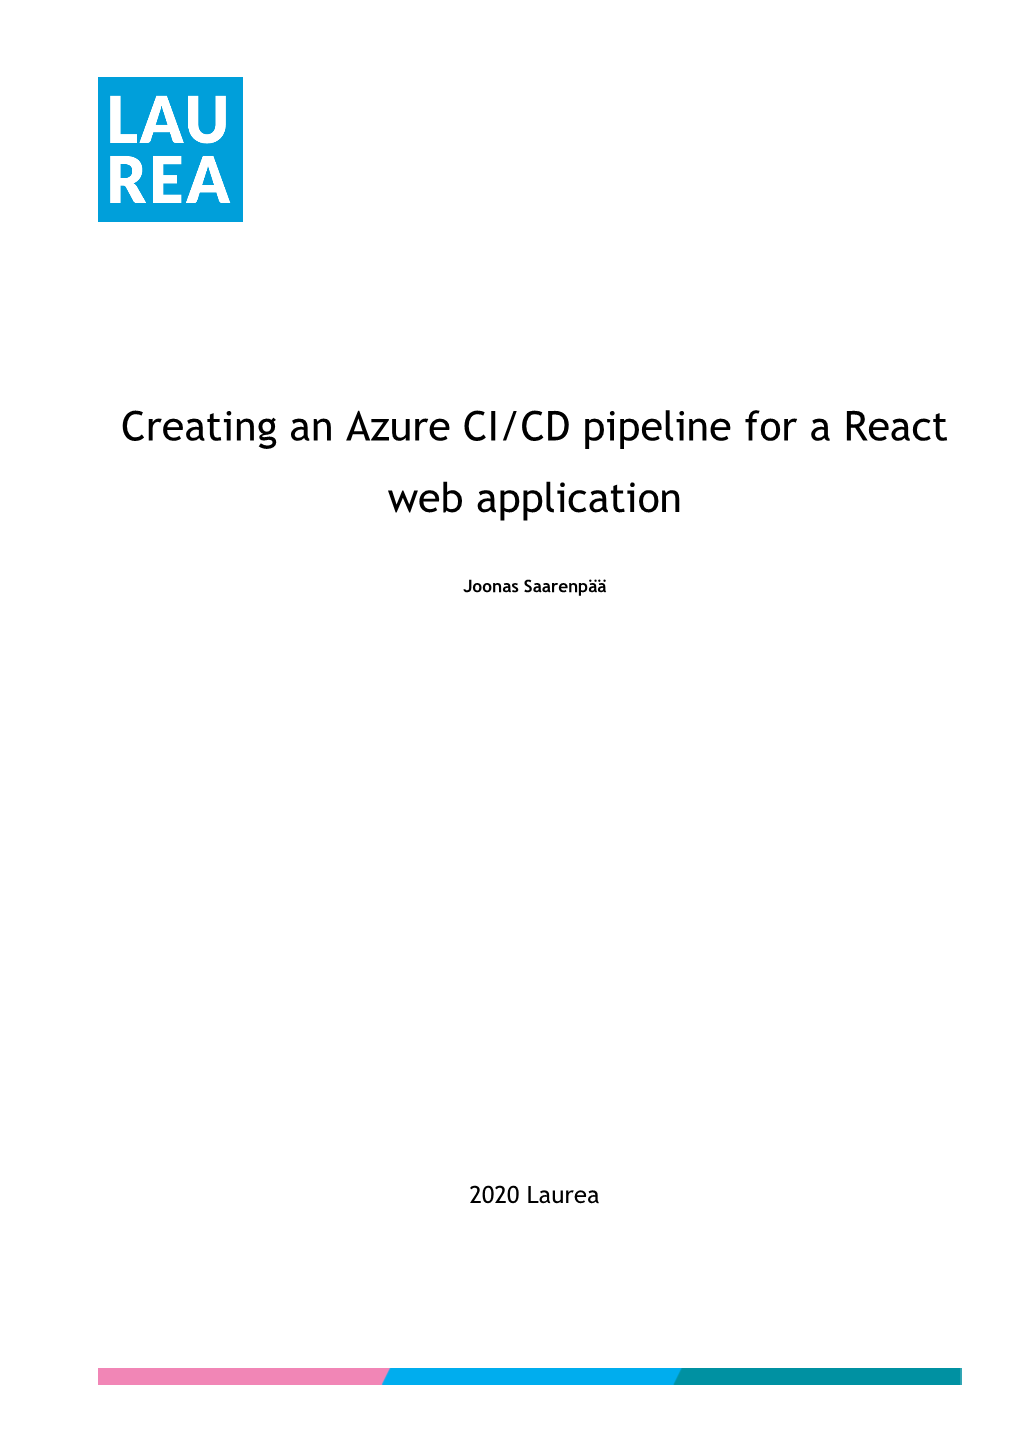 Creating an Azure CI/CD Pipeline for a React Web Application